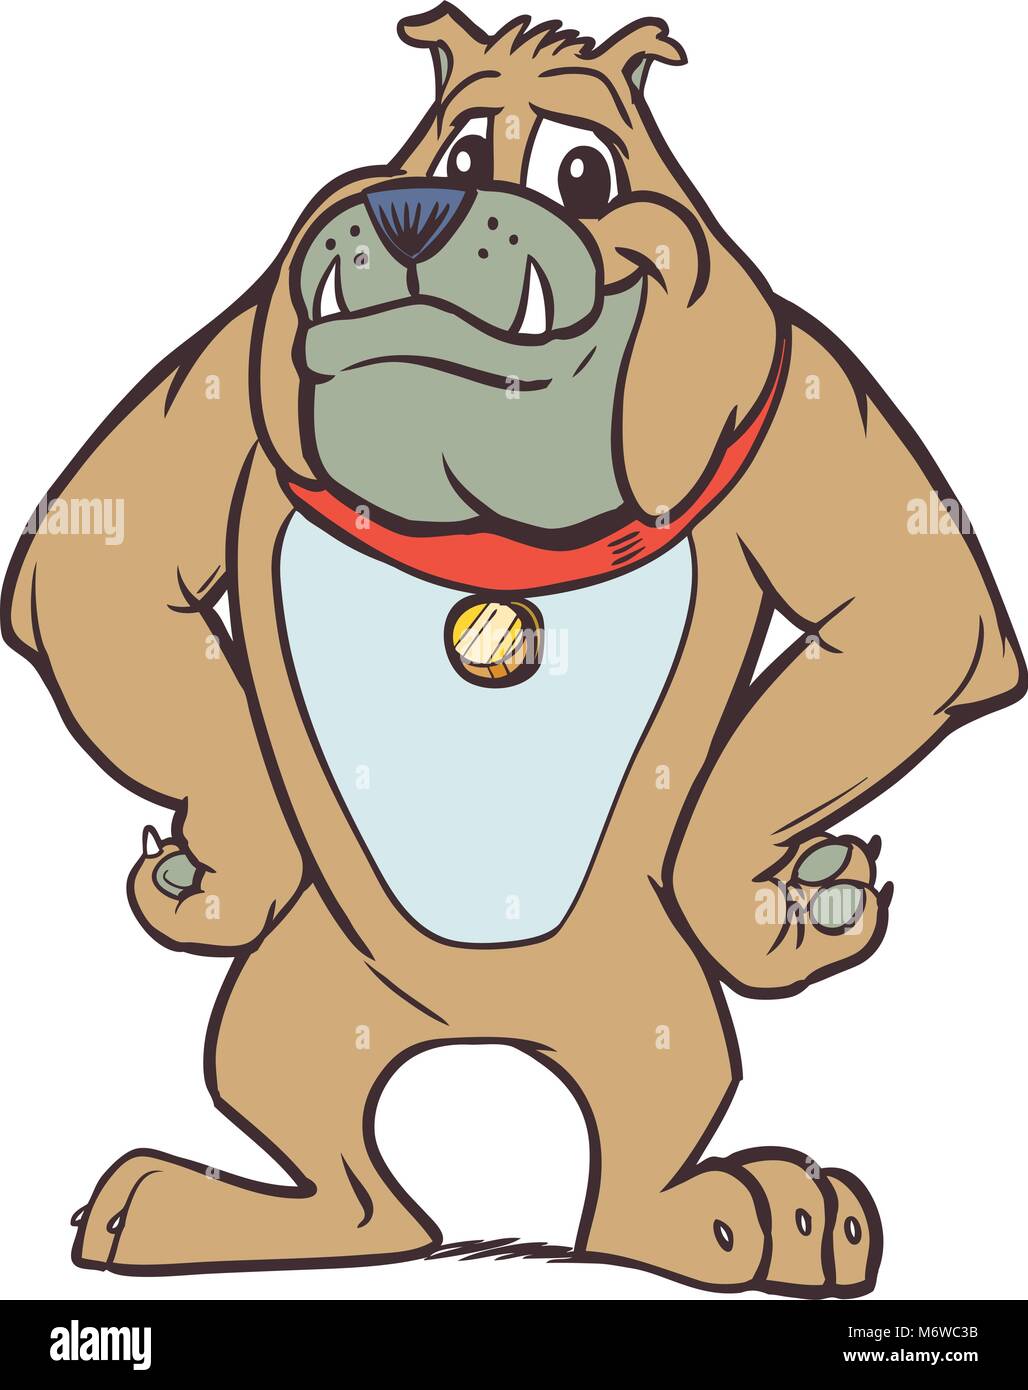 Vector cartoon clip art illustration of a strong but friendly anthropomorphic bulldog mascot with a red collar and his hands on his hips. Stock Vector